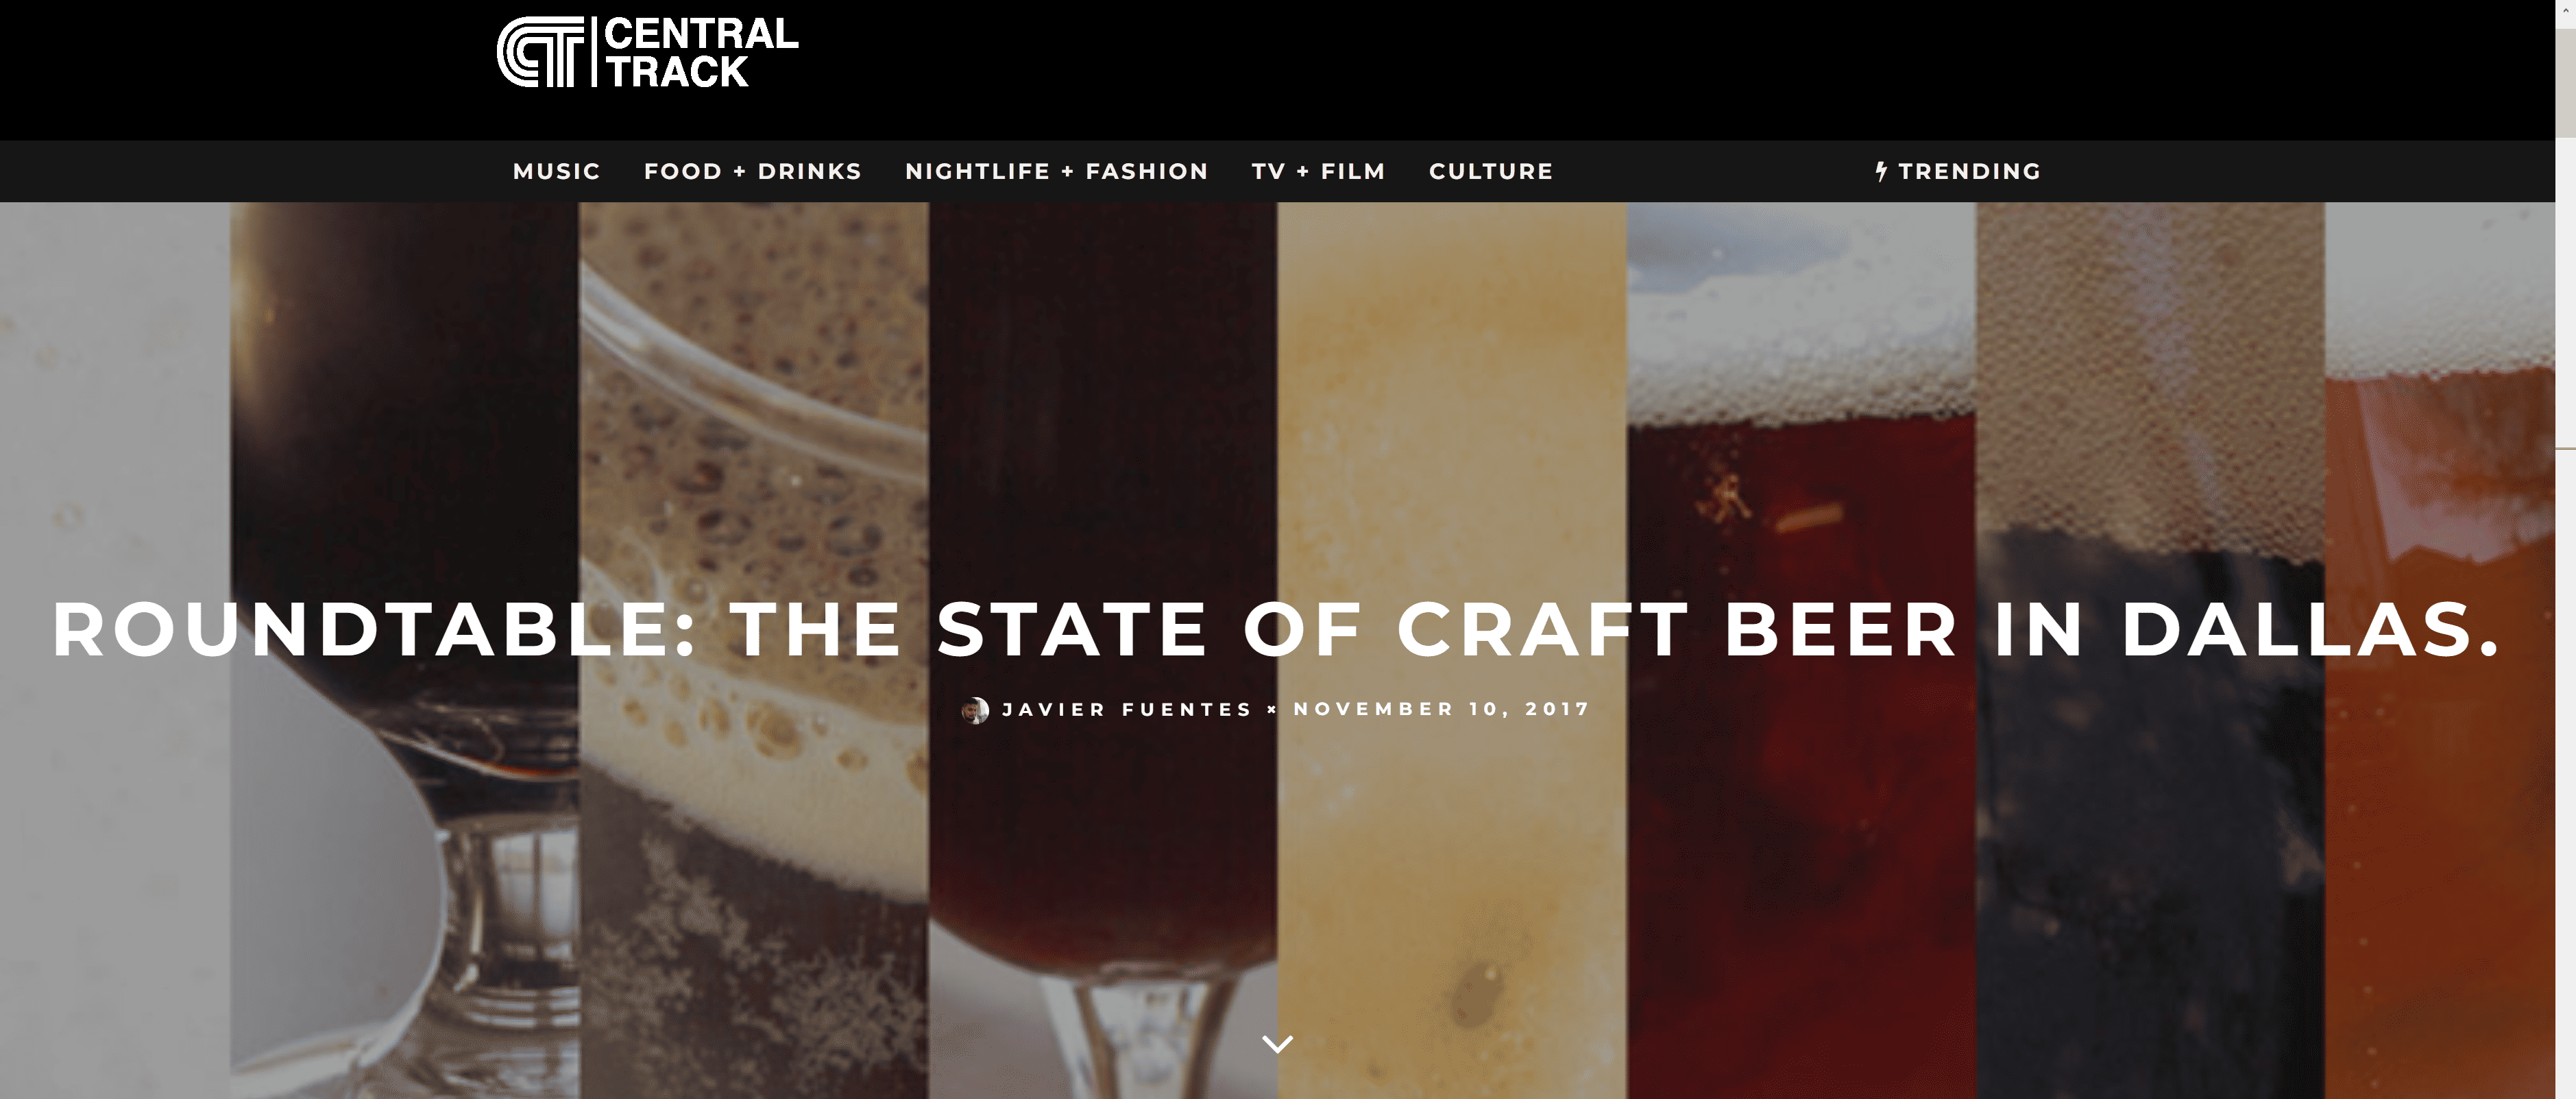 State of Craft Beer in Dallas in Central Track (2017)